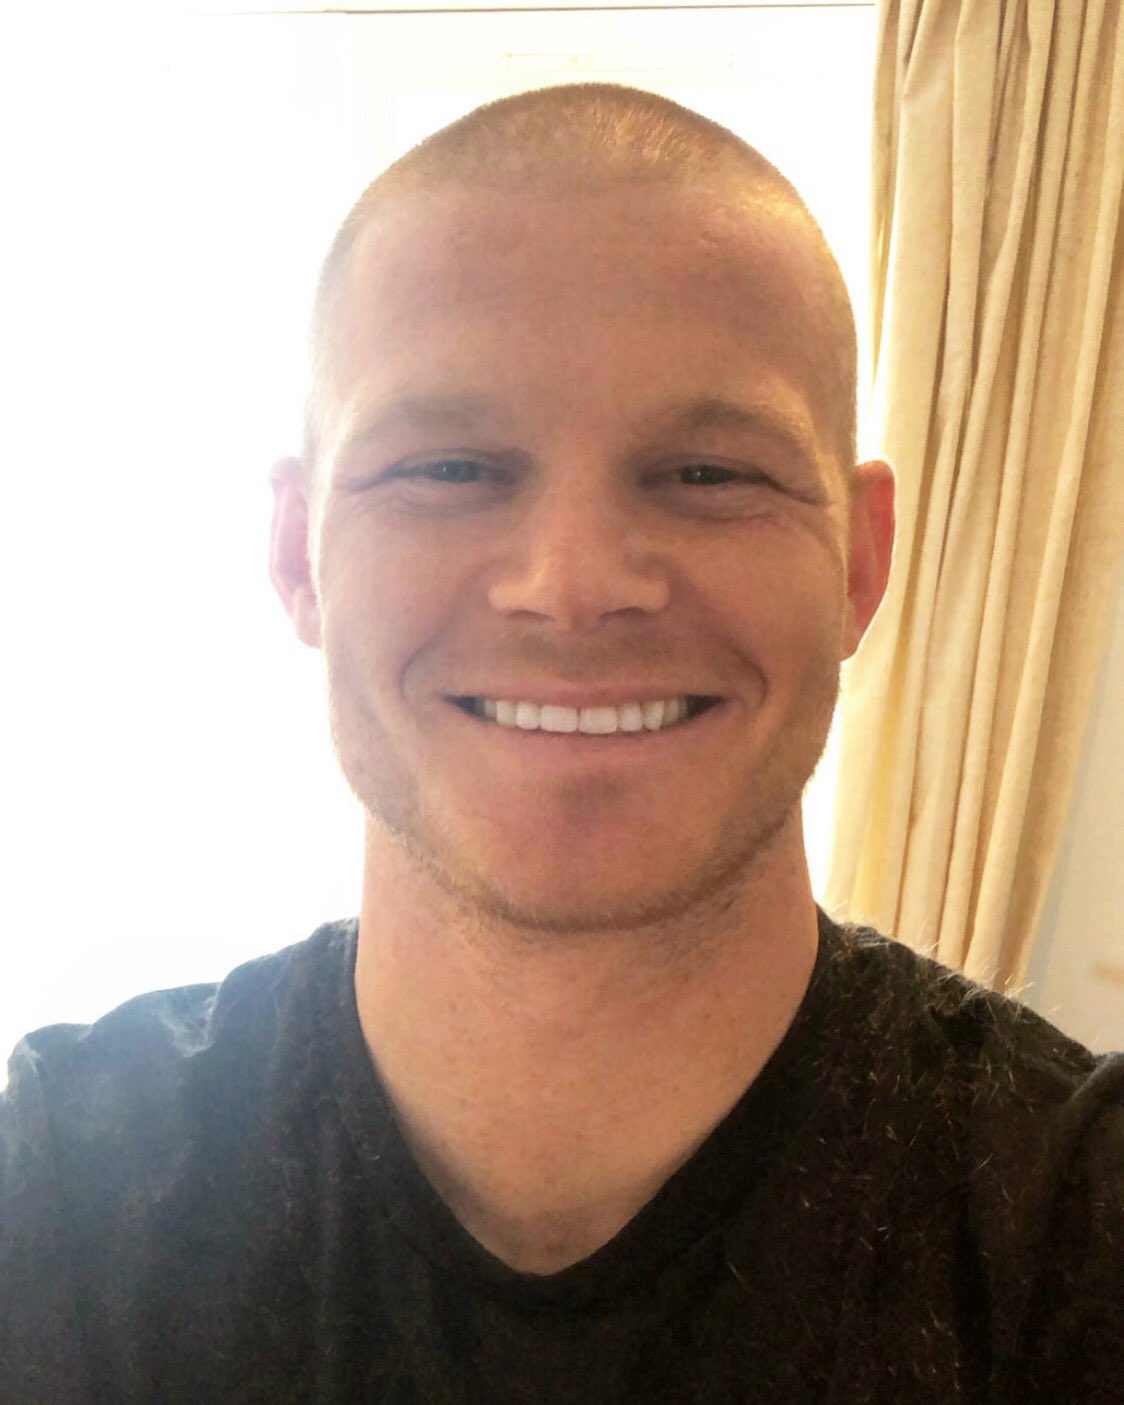 Billings shaves his head for a noble cause | Twitter